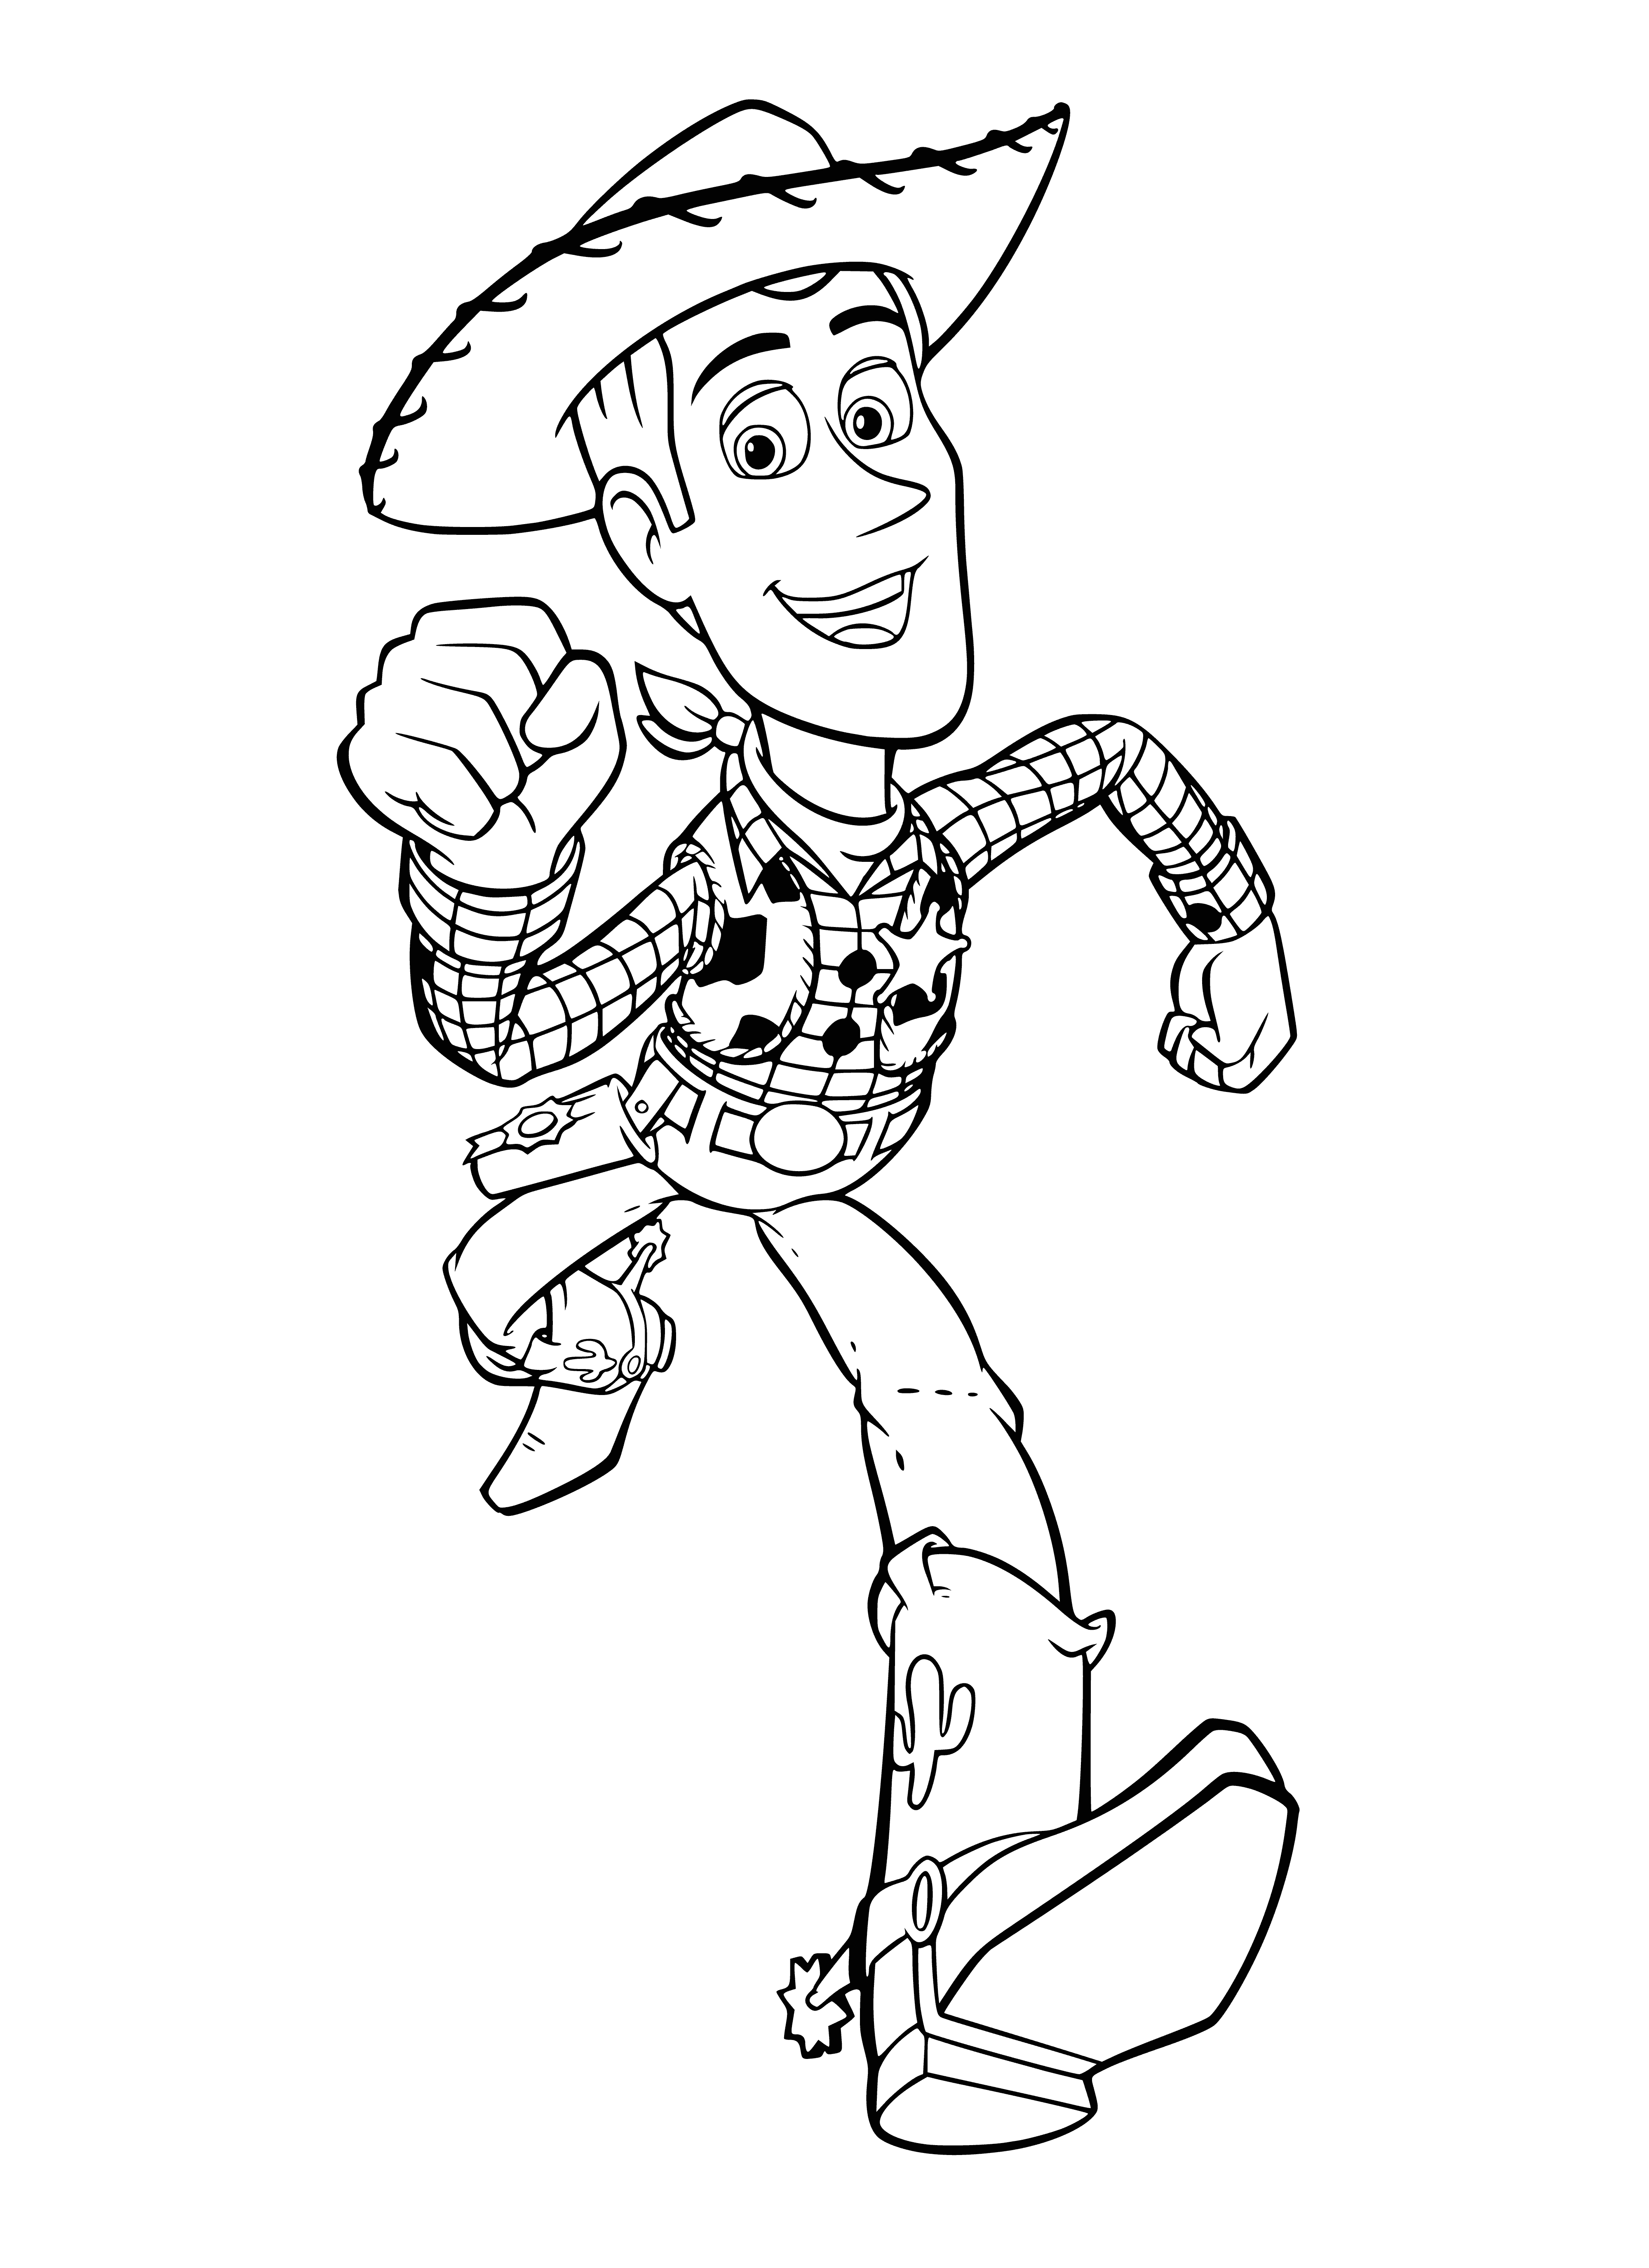 coloring page: A toy cowboy named Woody with a brown hat, yellow shirt, red neckerchief, blue jeans, brown boots, and black belt with a blue bandanna in his back pocket holding a lasso. #Woody #ToyStory